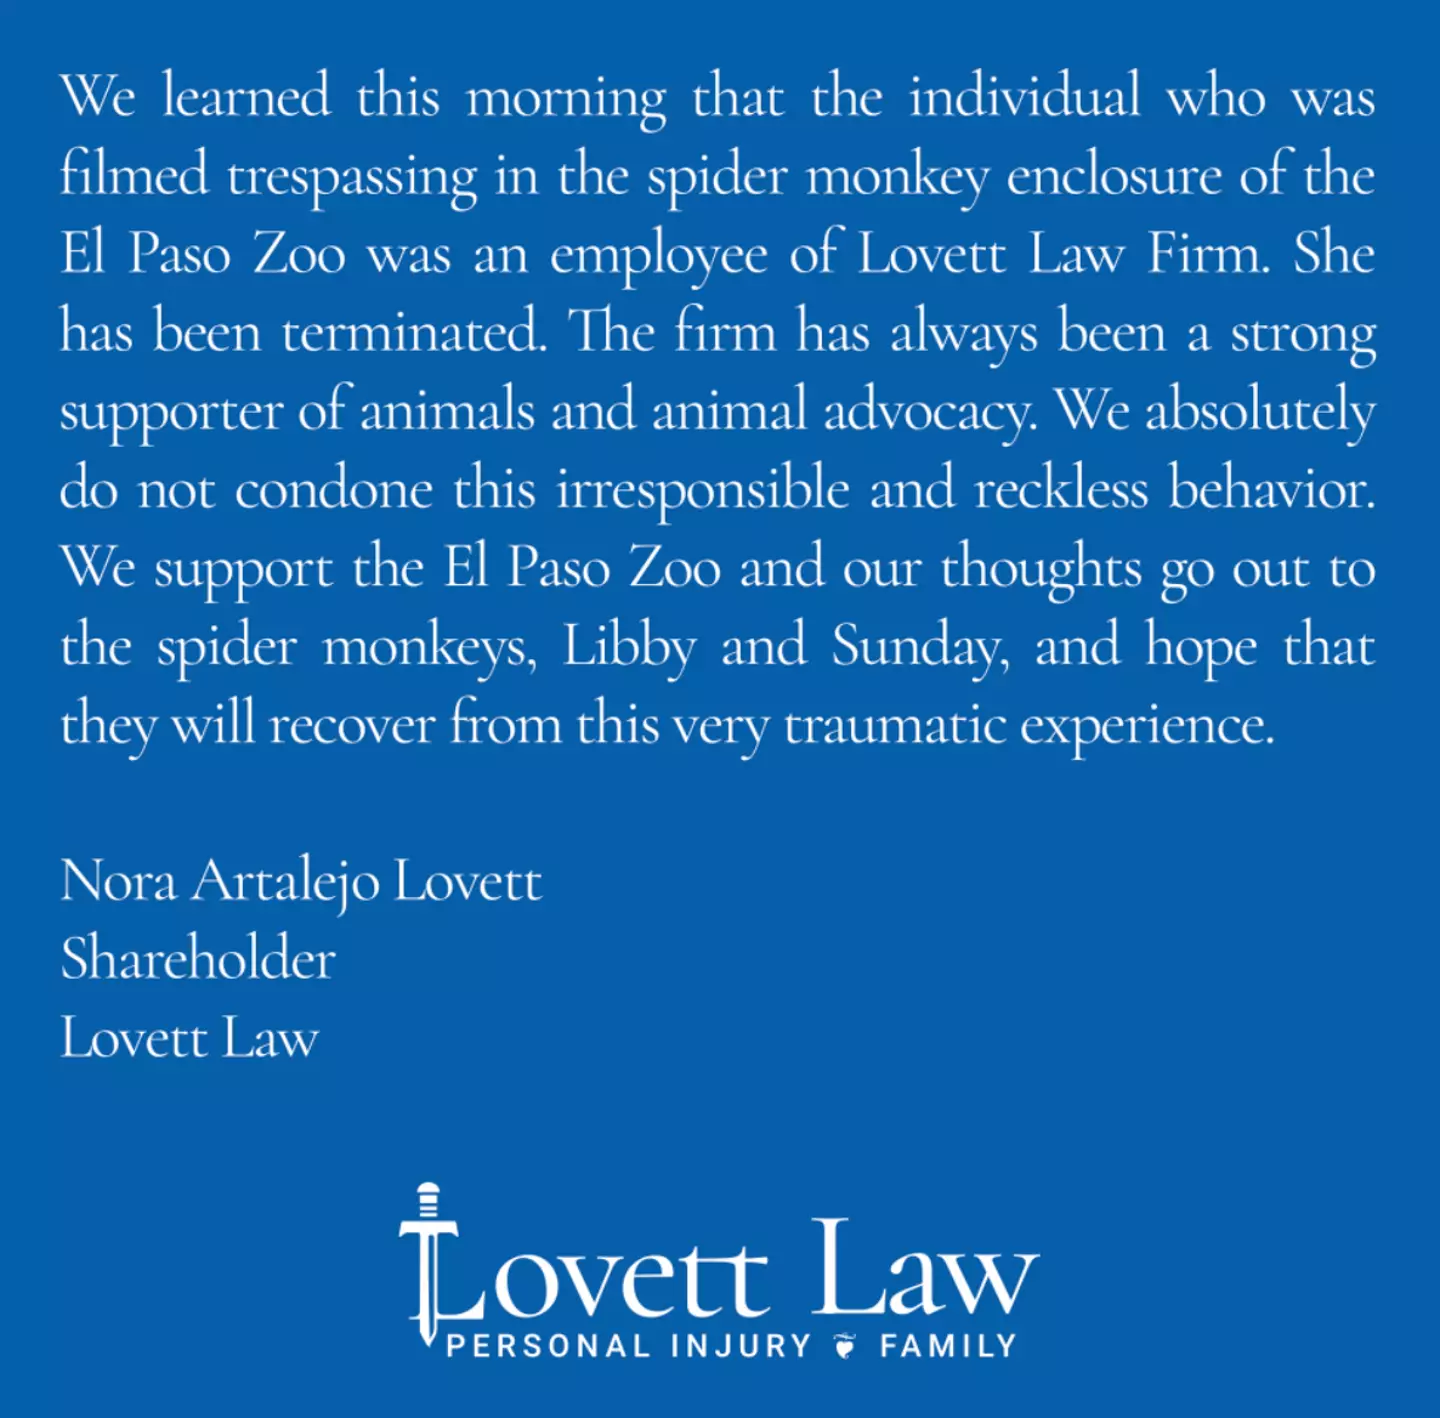 Lucy Rae was let go from her job at Lovett Law Firm as a result of the incident.